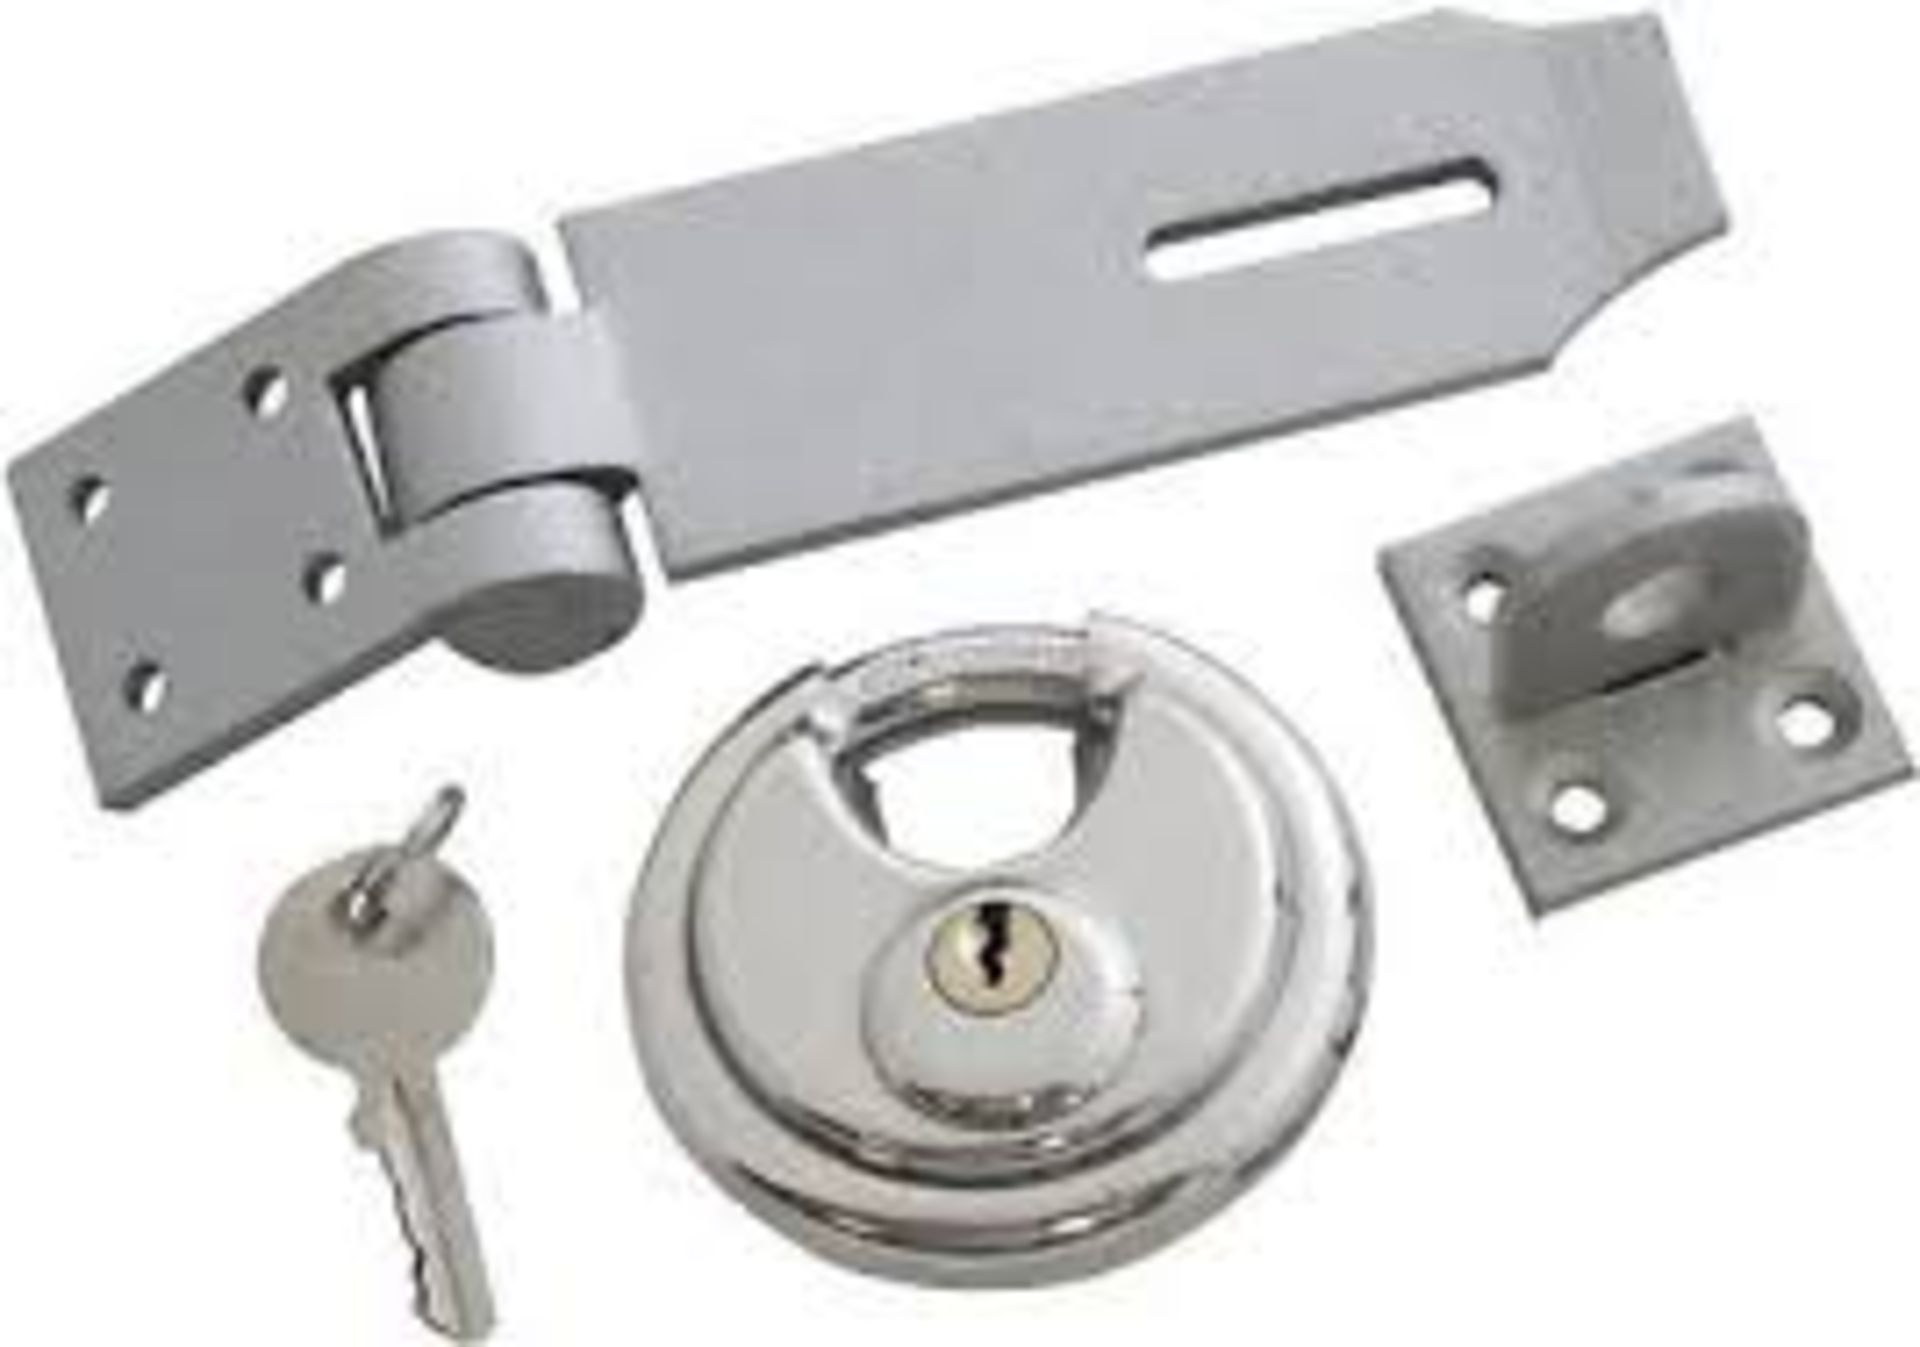 V Brand New 70mm Disc Padlock With Hasp X 2 YOUR BID PRICE TO BE MULTIPLIED BY TWO